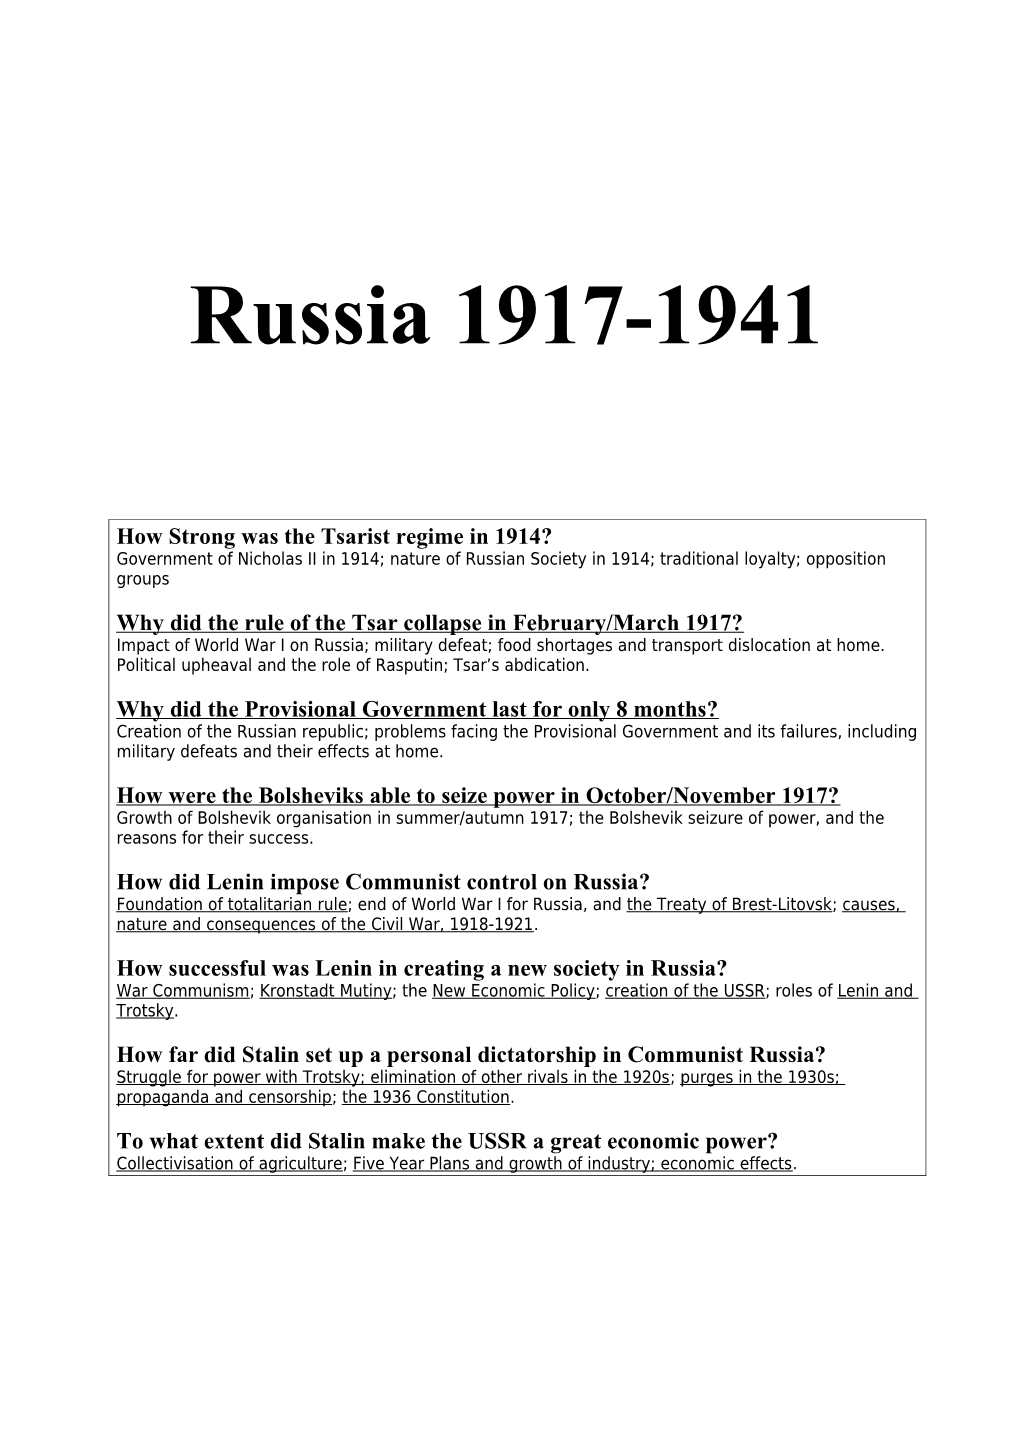 How Strong Was the Tsarist Regime in 1914?